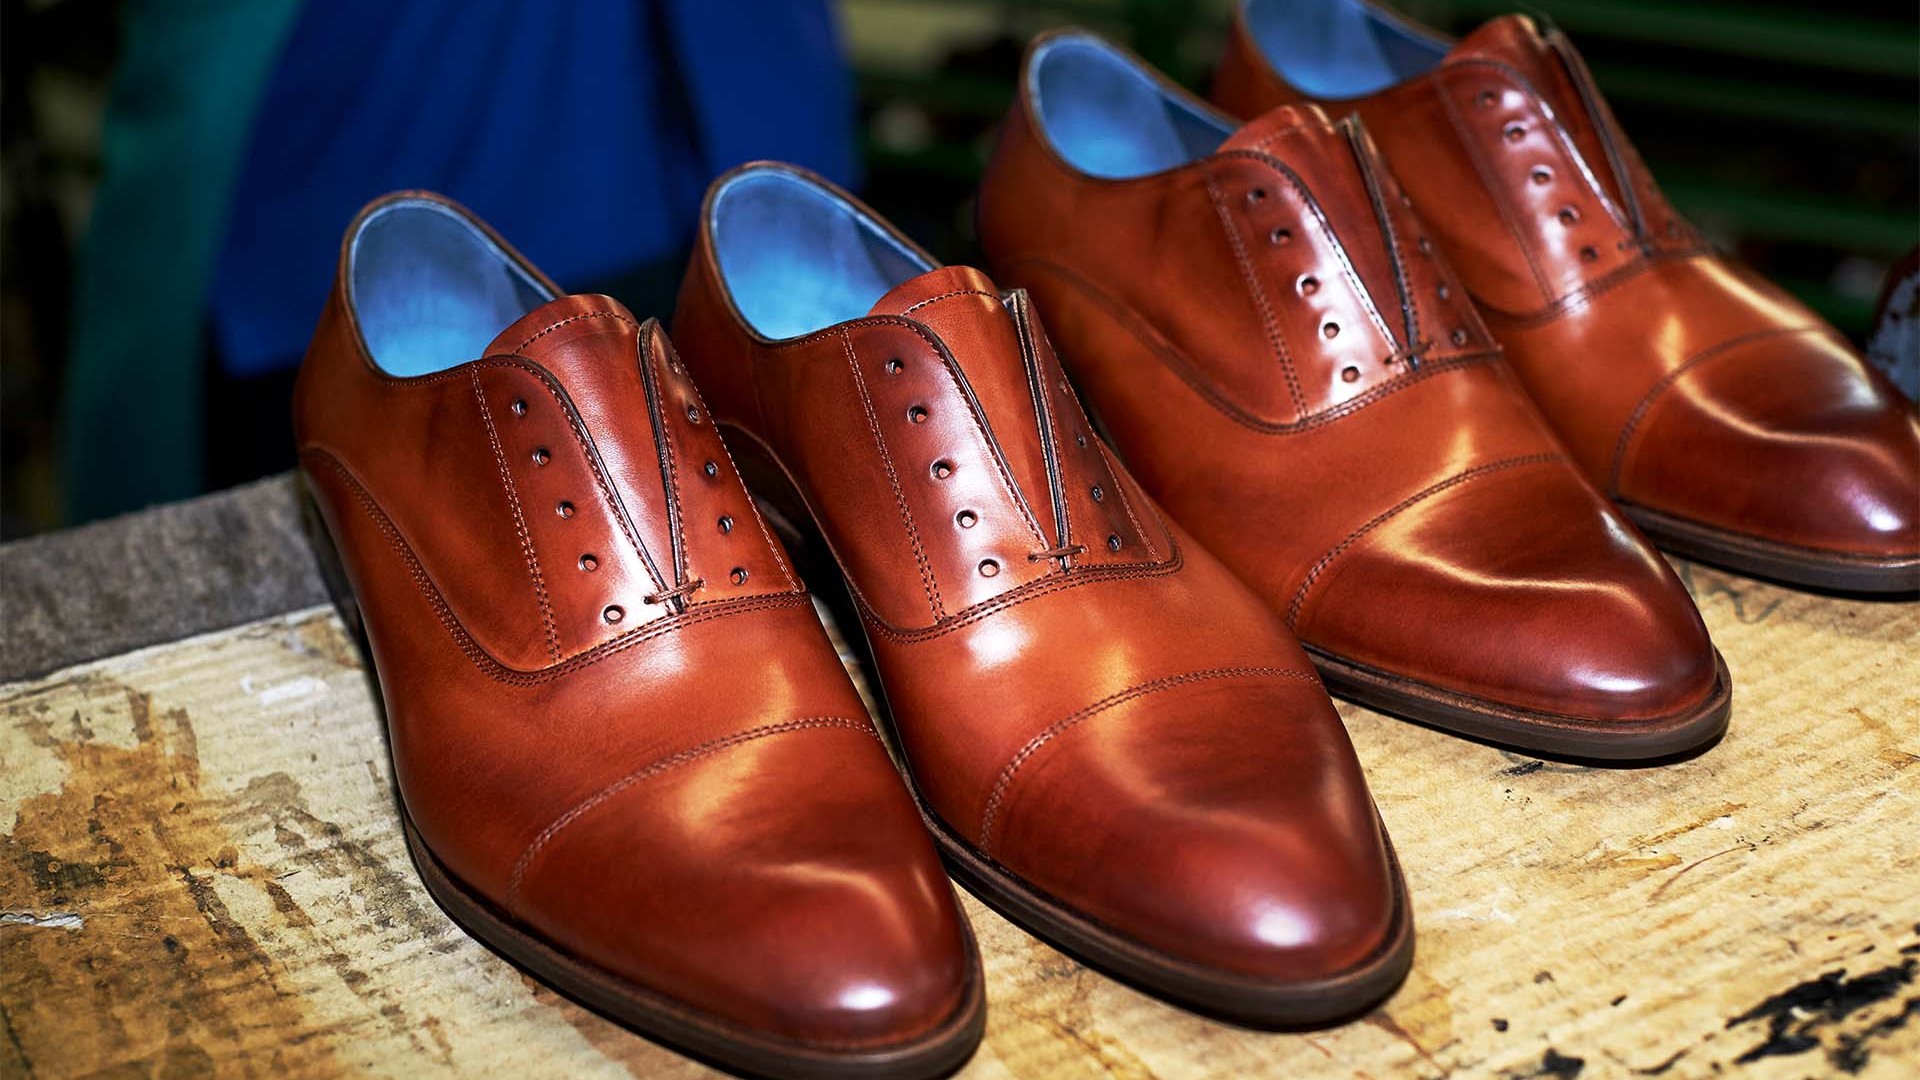 Sons of London shoe brand | Square Mile